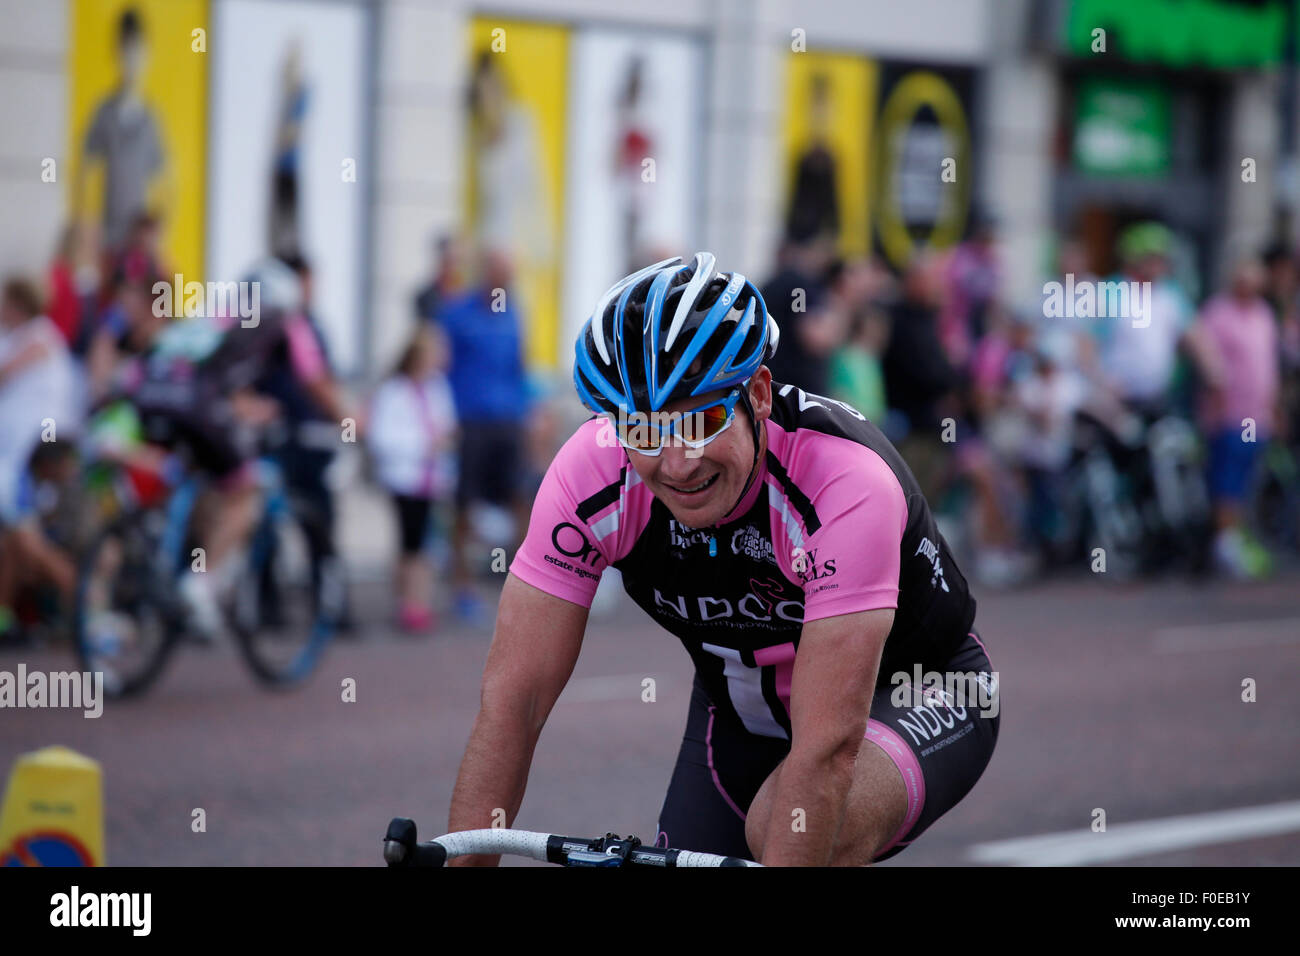 Bangor, Co. Down, Northern Ireland. 13th August 2015. The Seat Criterium Super 7 Final cycle race is abandoned after a competitor is injured. Credit:  J Orr/Alamy Live News Stock Photo